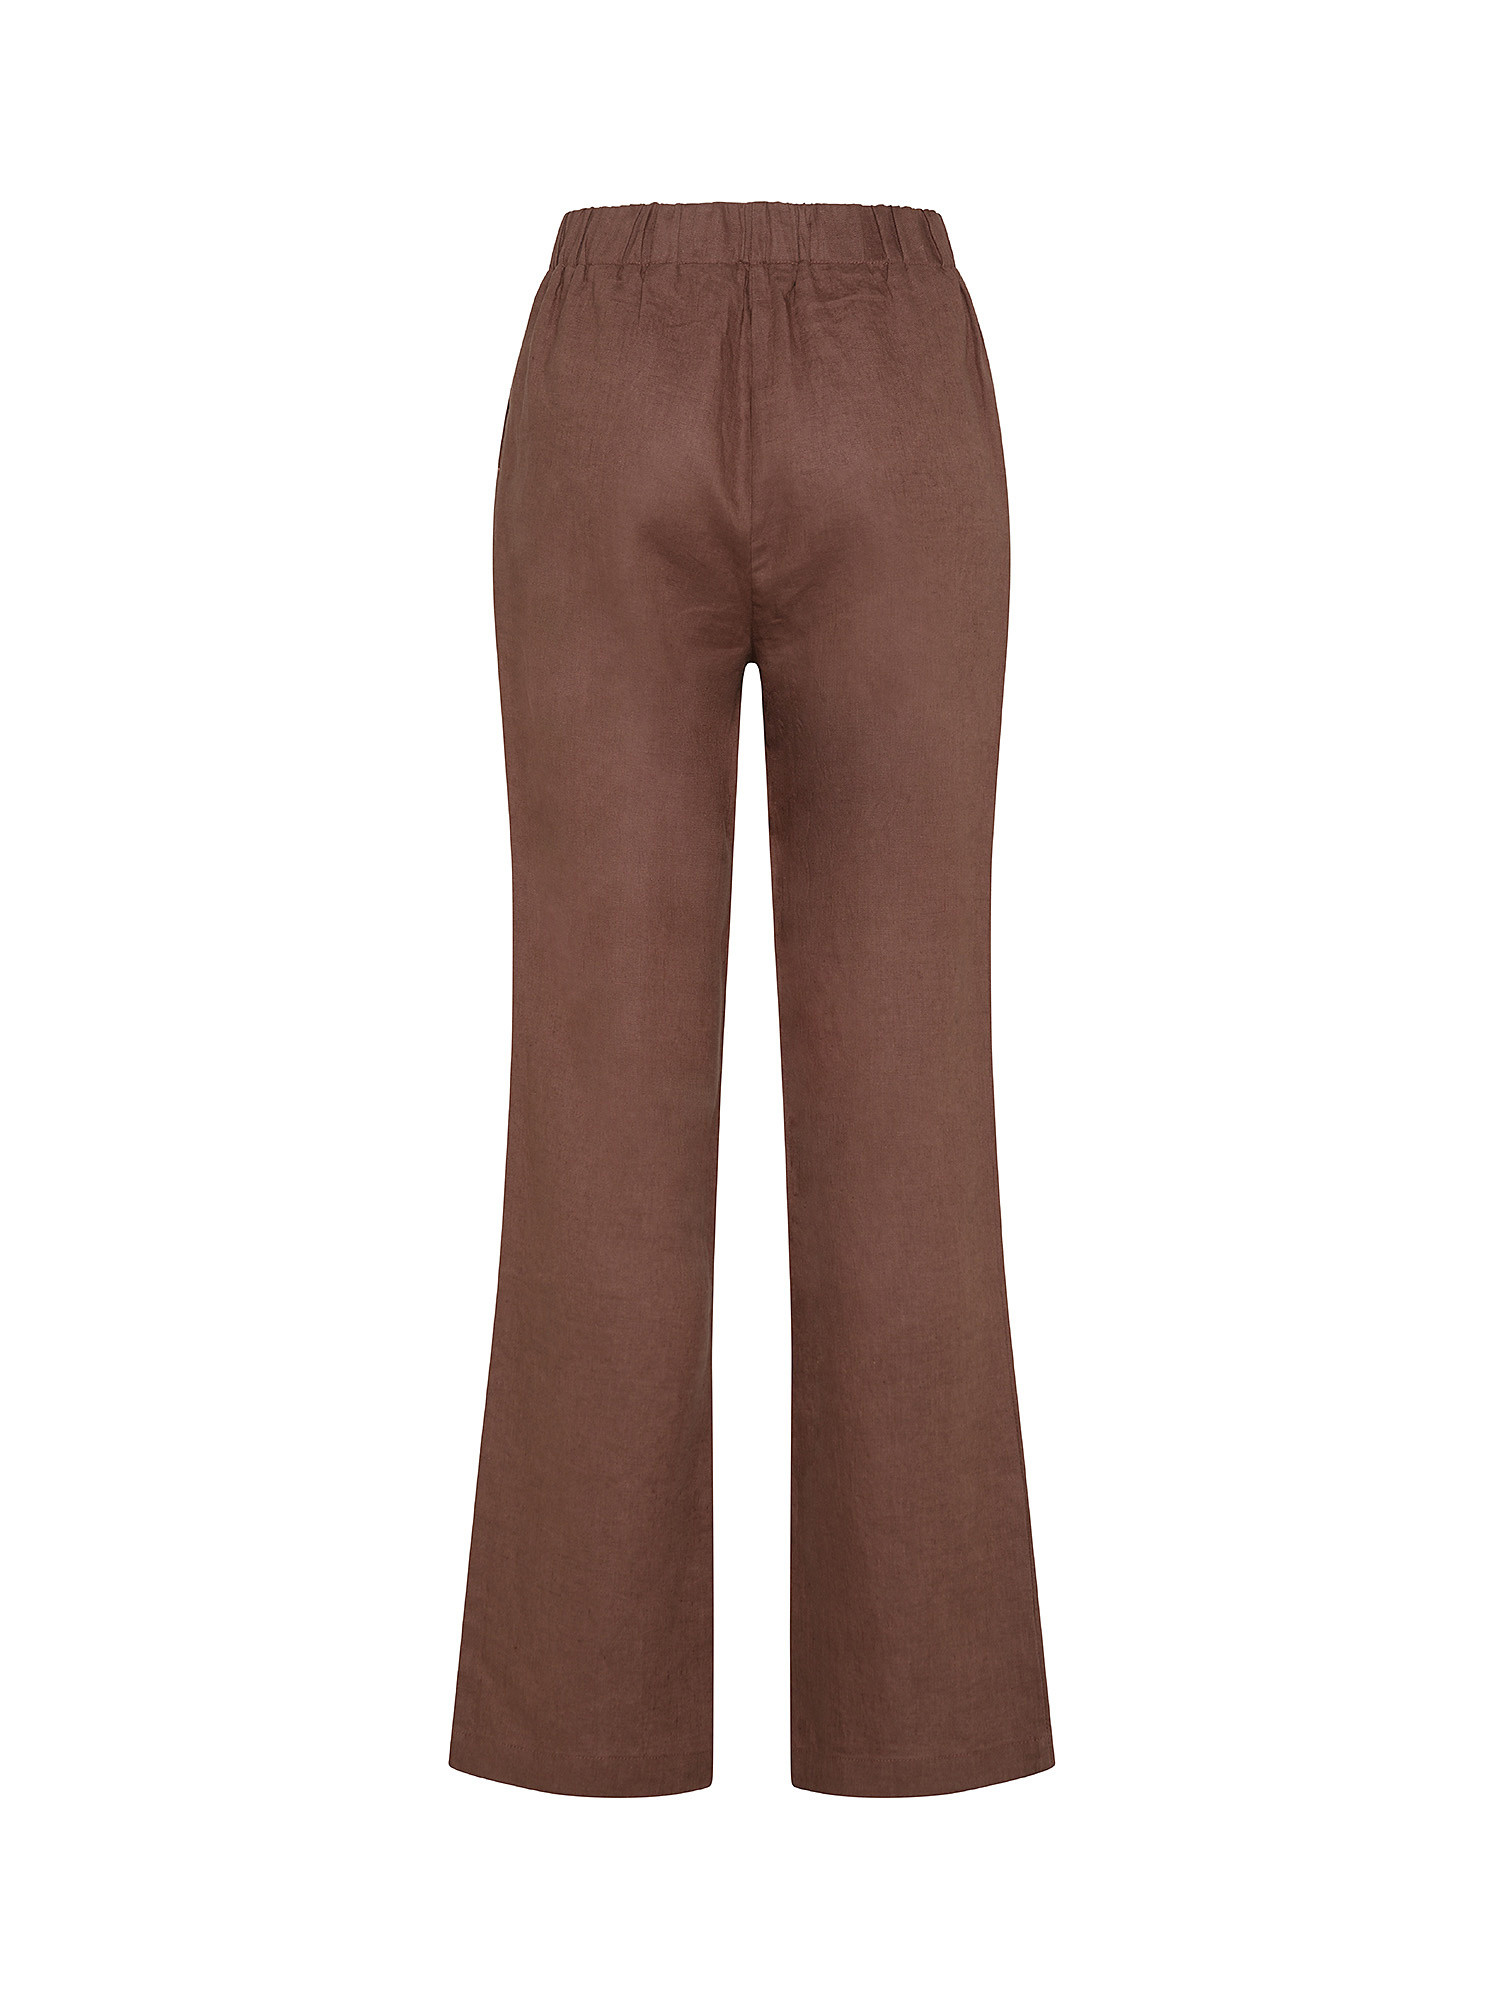 Koan - Straight linen trousers, Brown, large image number 1